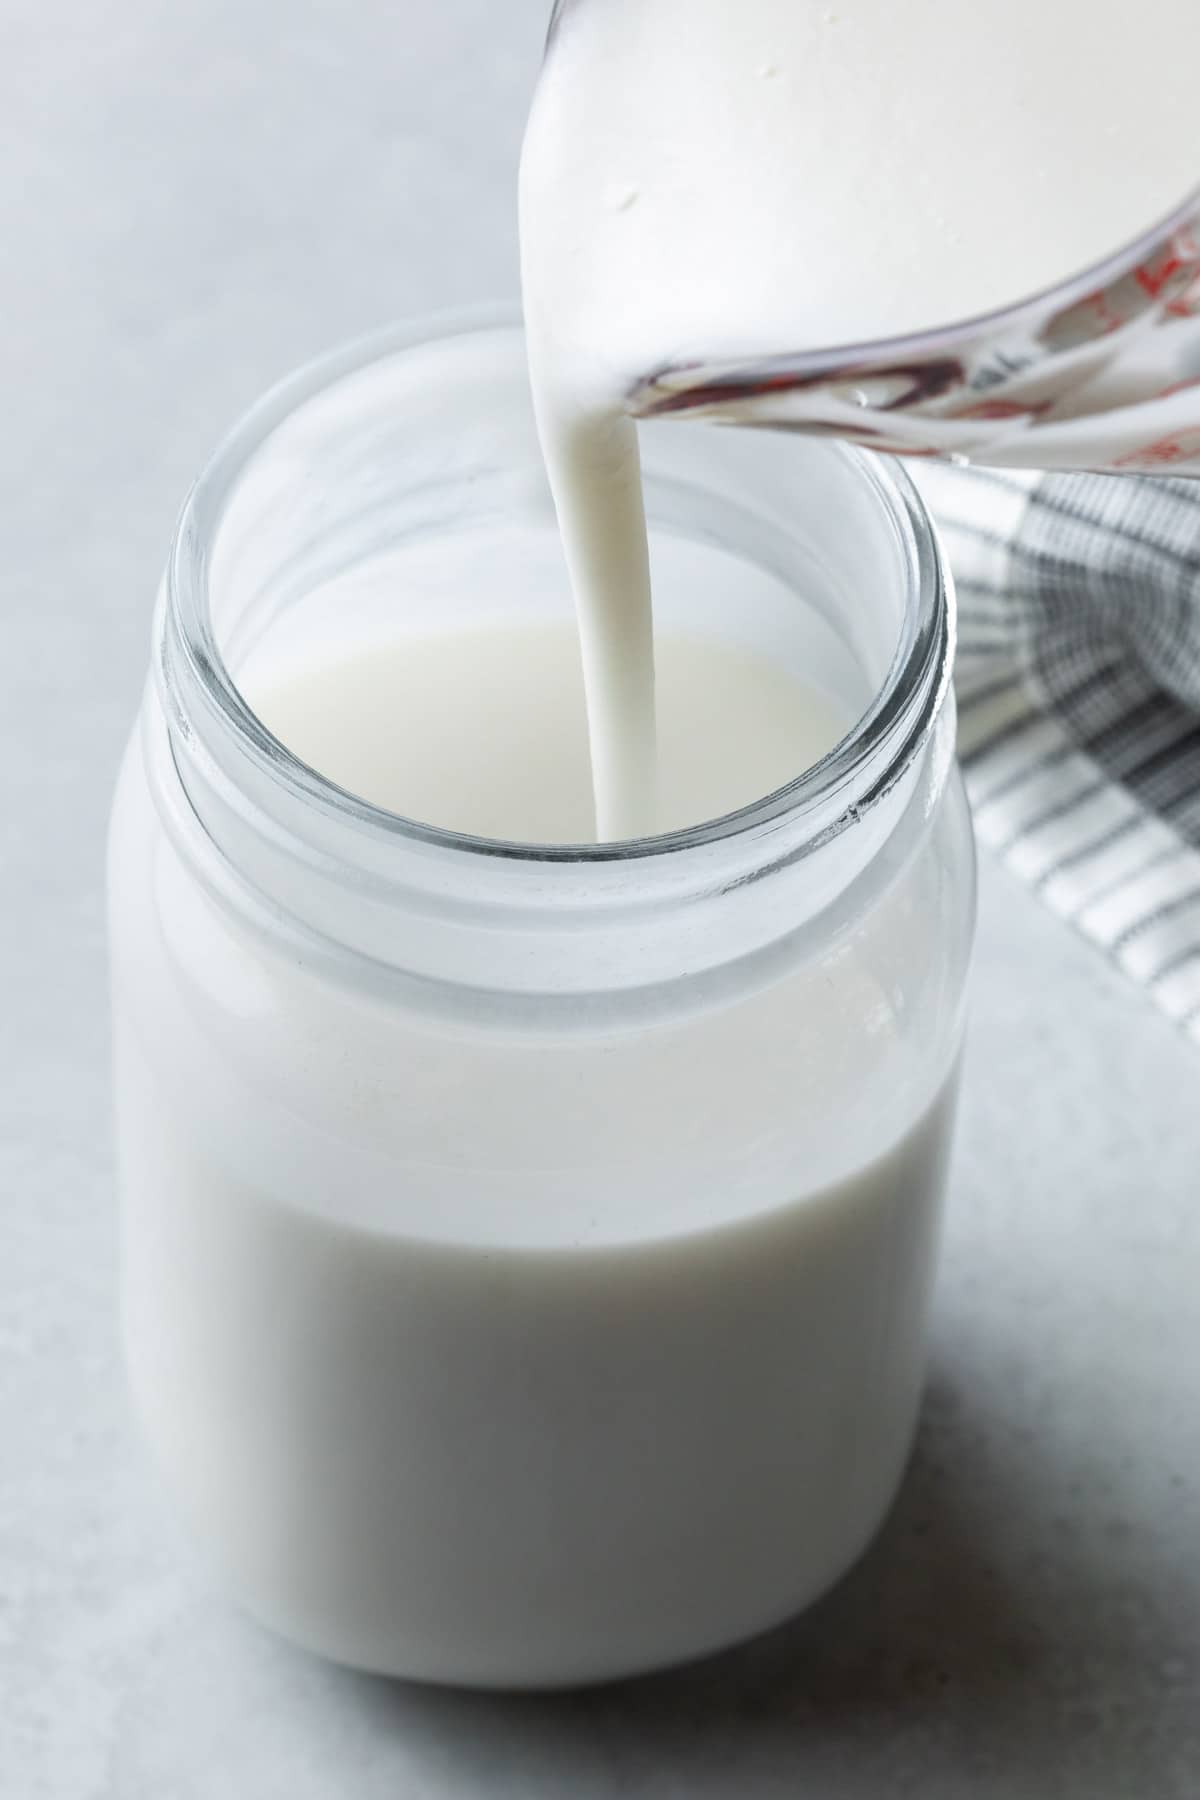 Dairy free buttermilk being poured into a mason jar from a glass pitcher